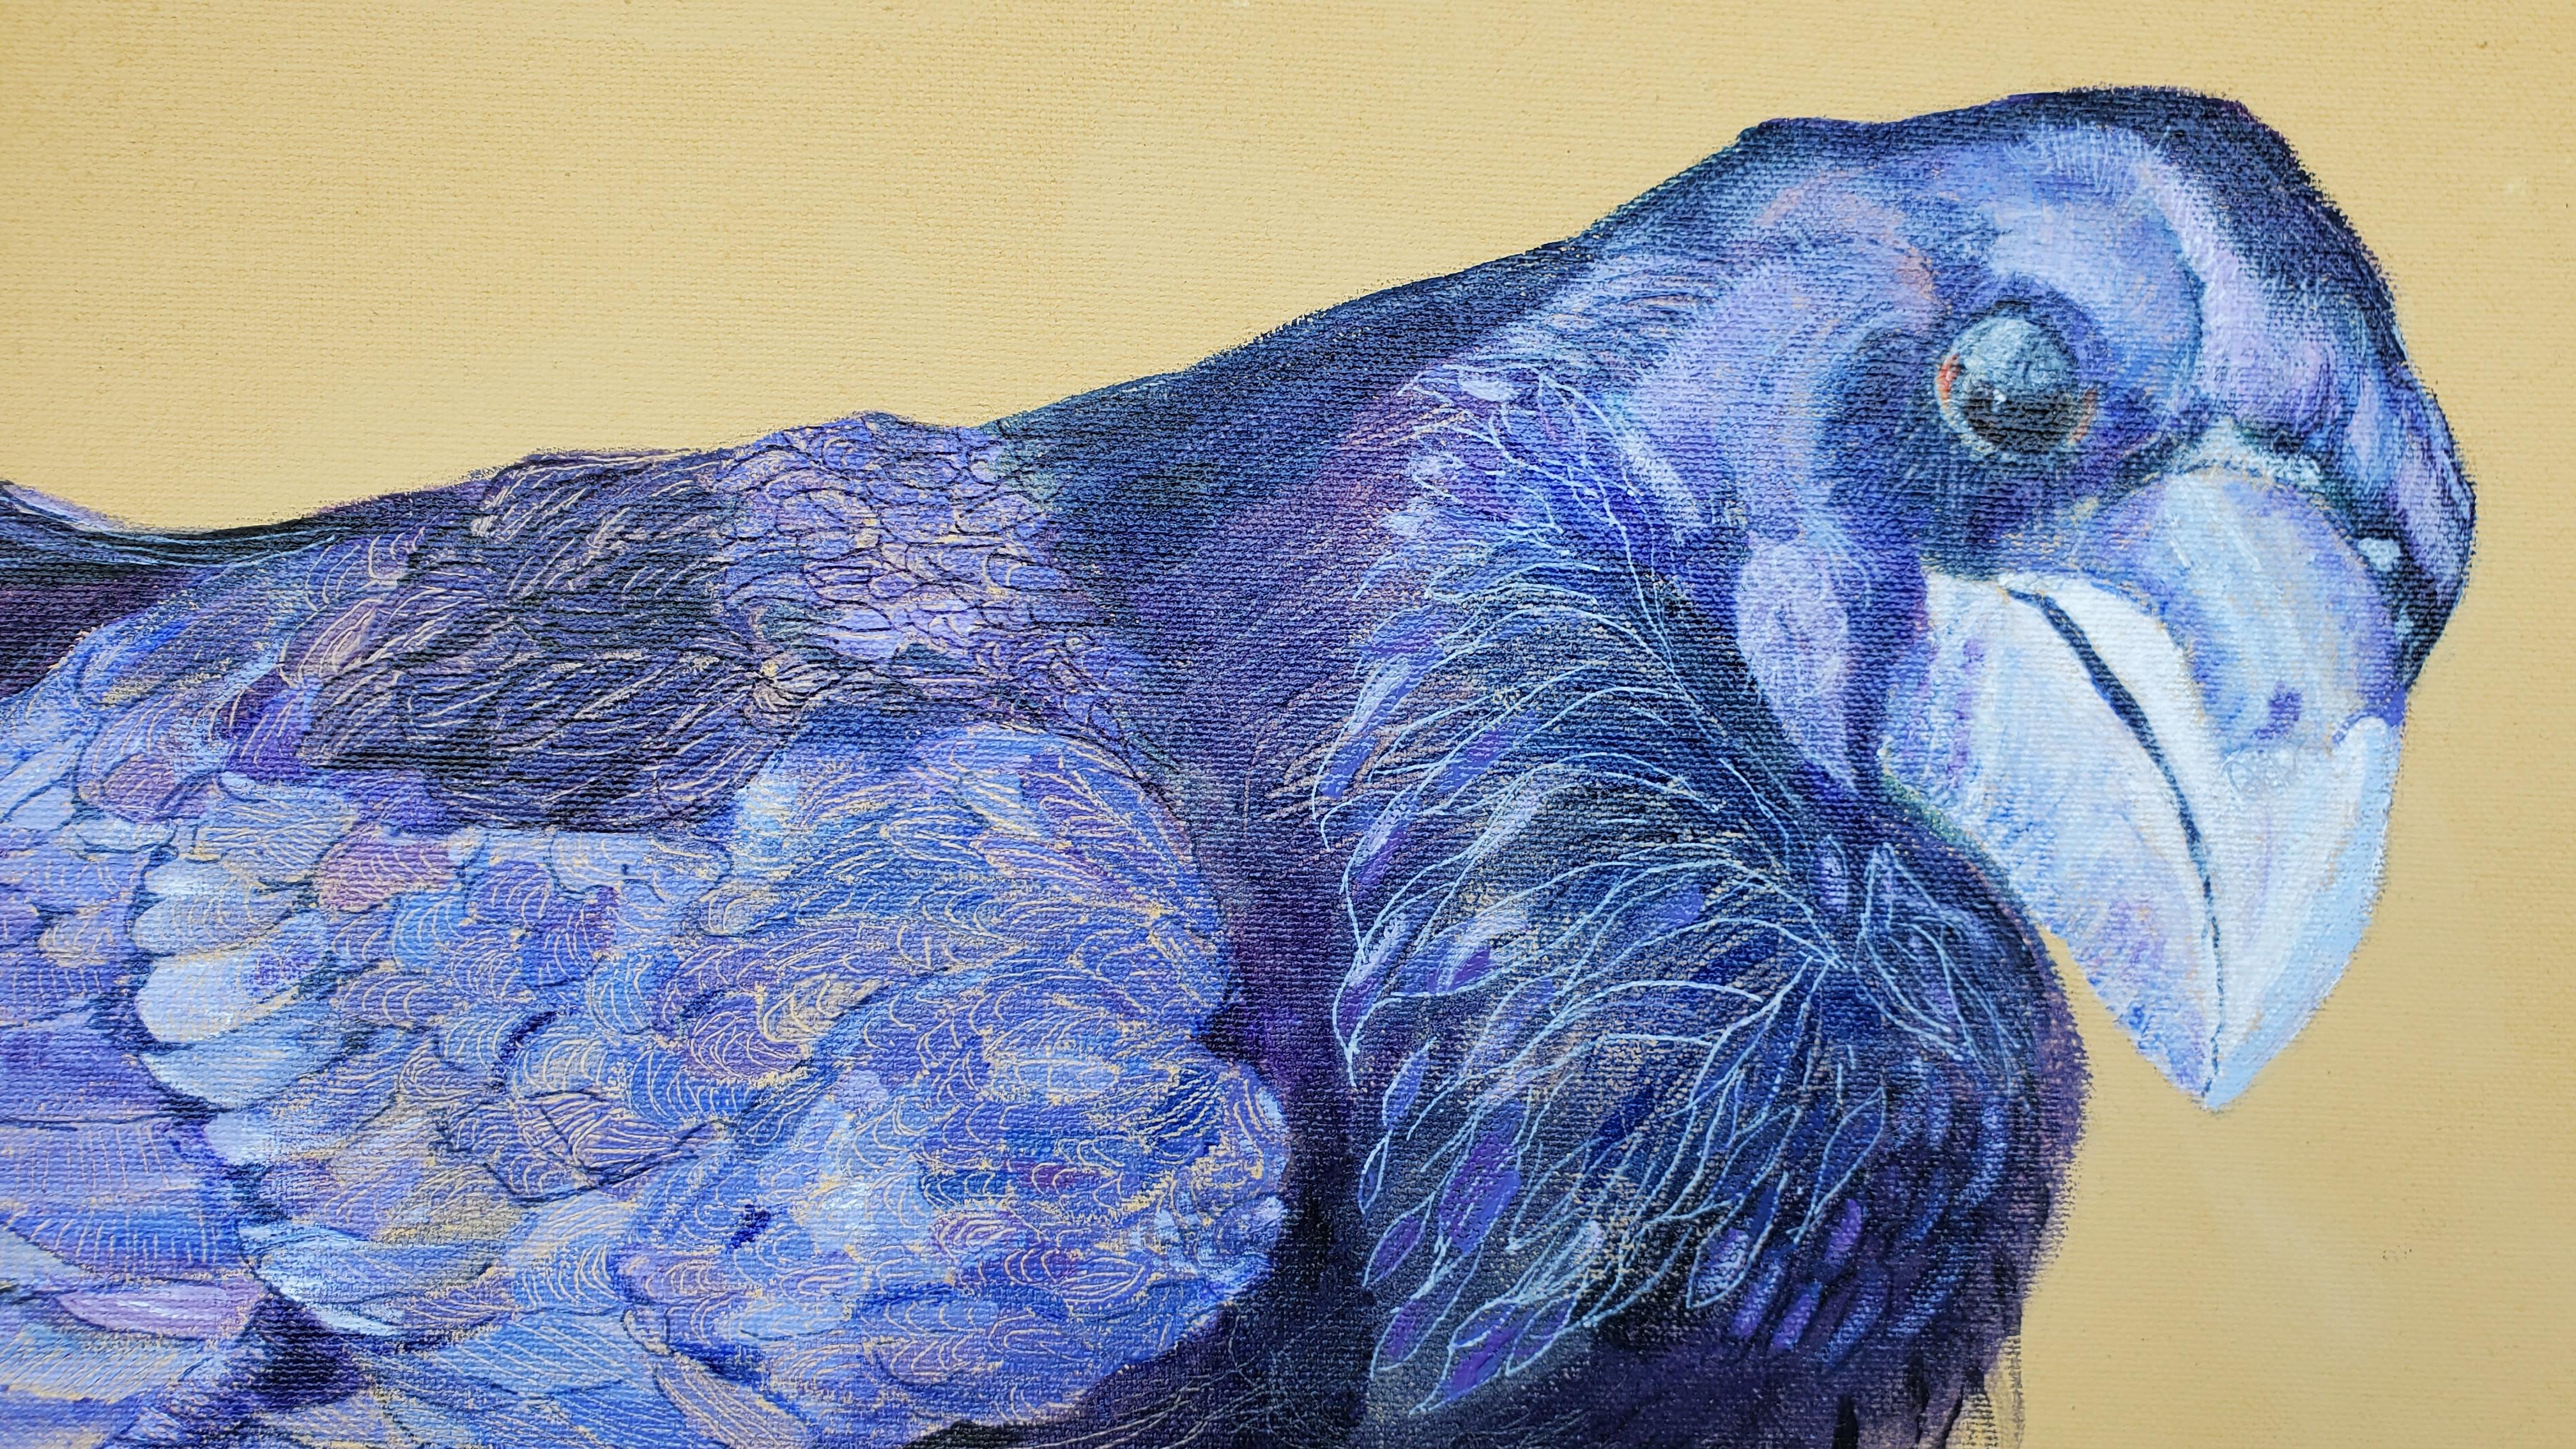 Avian Fables: Raven and Beach Ball 1 - acrylic and ink on canvas - Painting by Alison Keenan